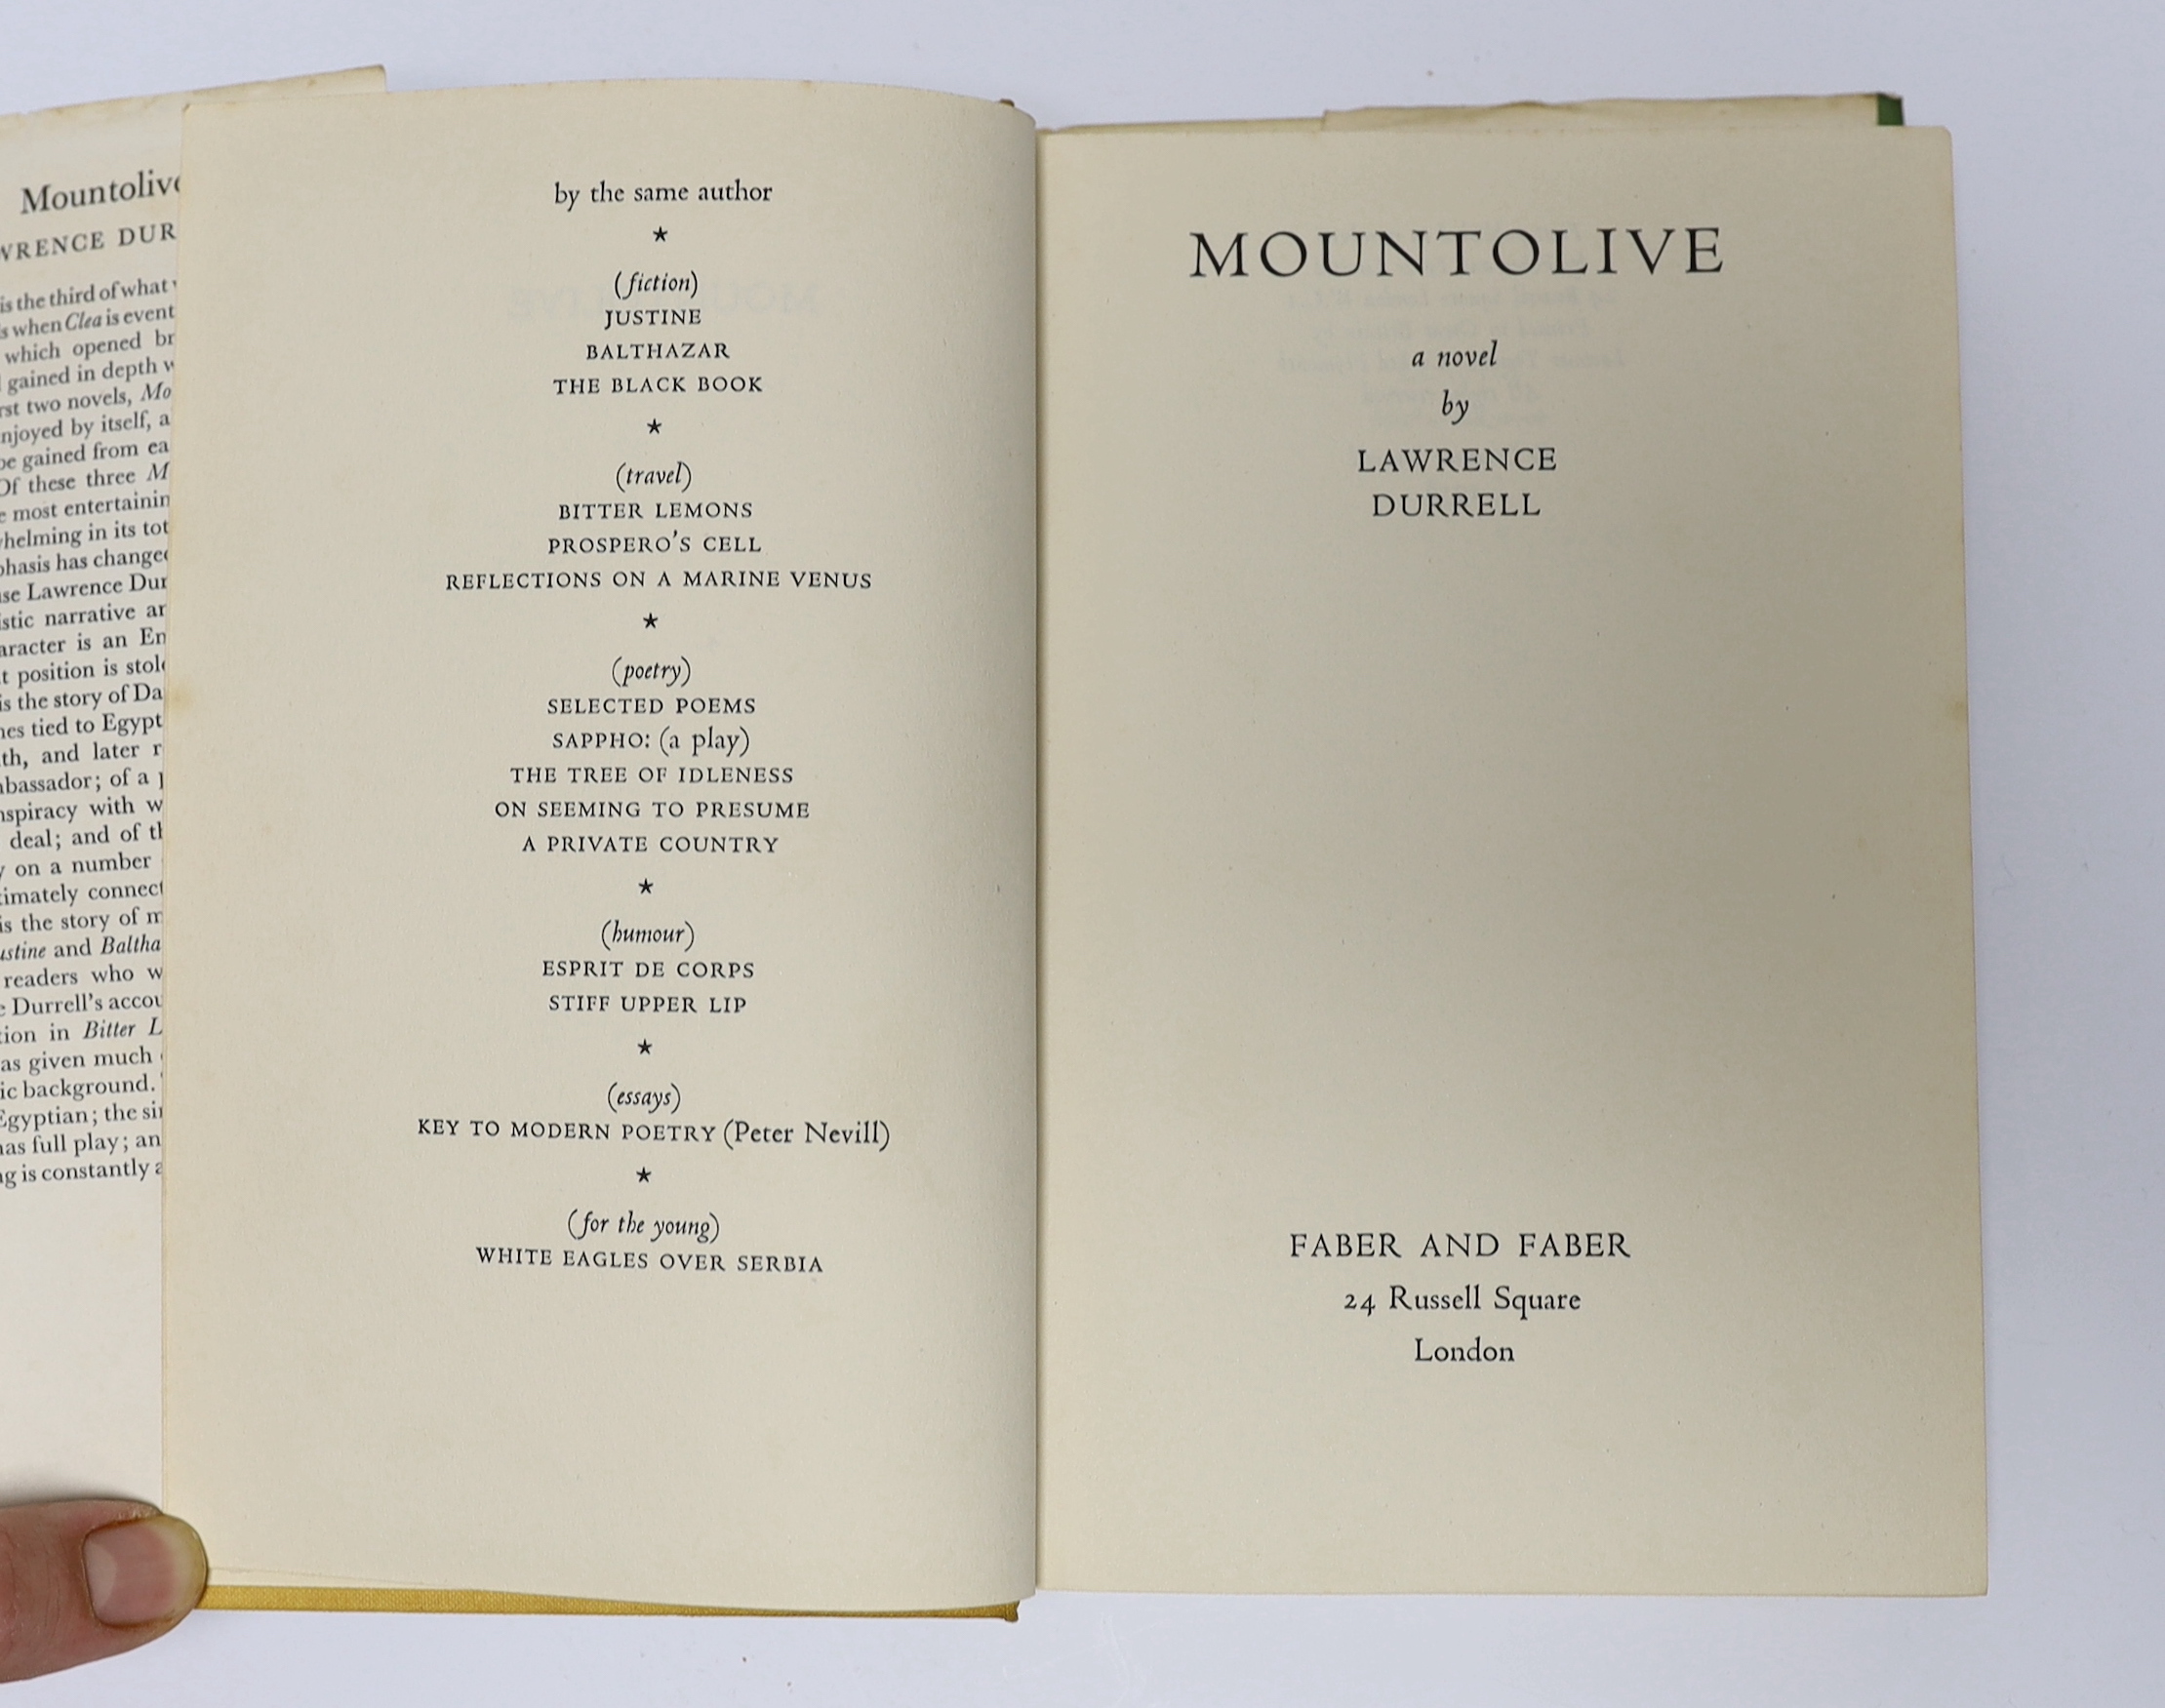 Durrell, Lawrence - 2 works [from the Alexandria Quartet] - Justine, 1st edition, original red cloth in d/j, Faber and Faber, London 1957 and Mountolive, 1st edition, original yellow cloth in d/j, Faber and Faber, London